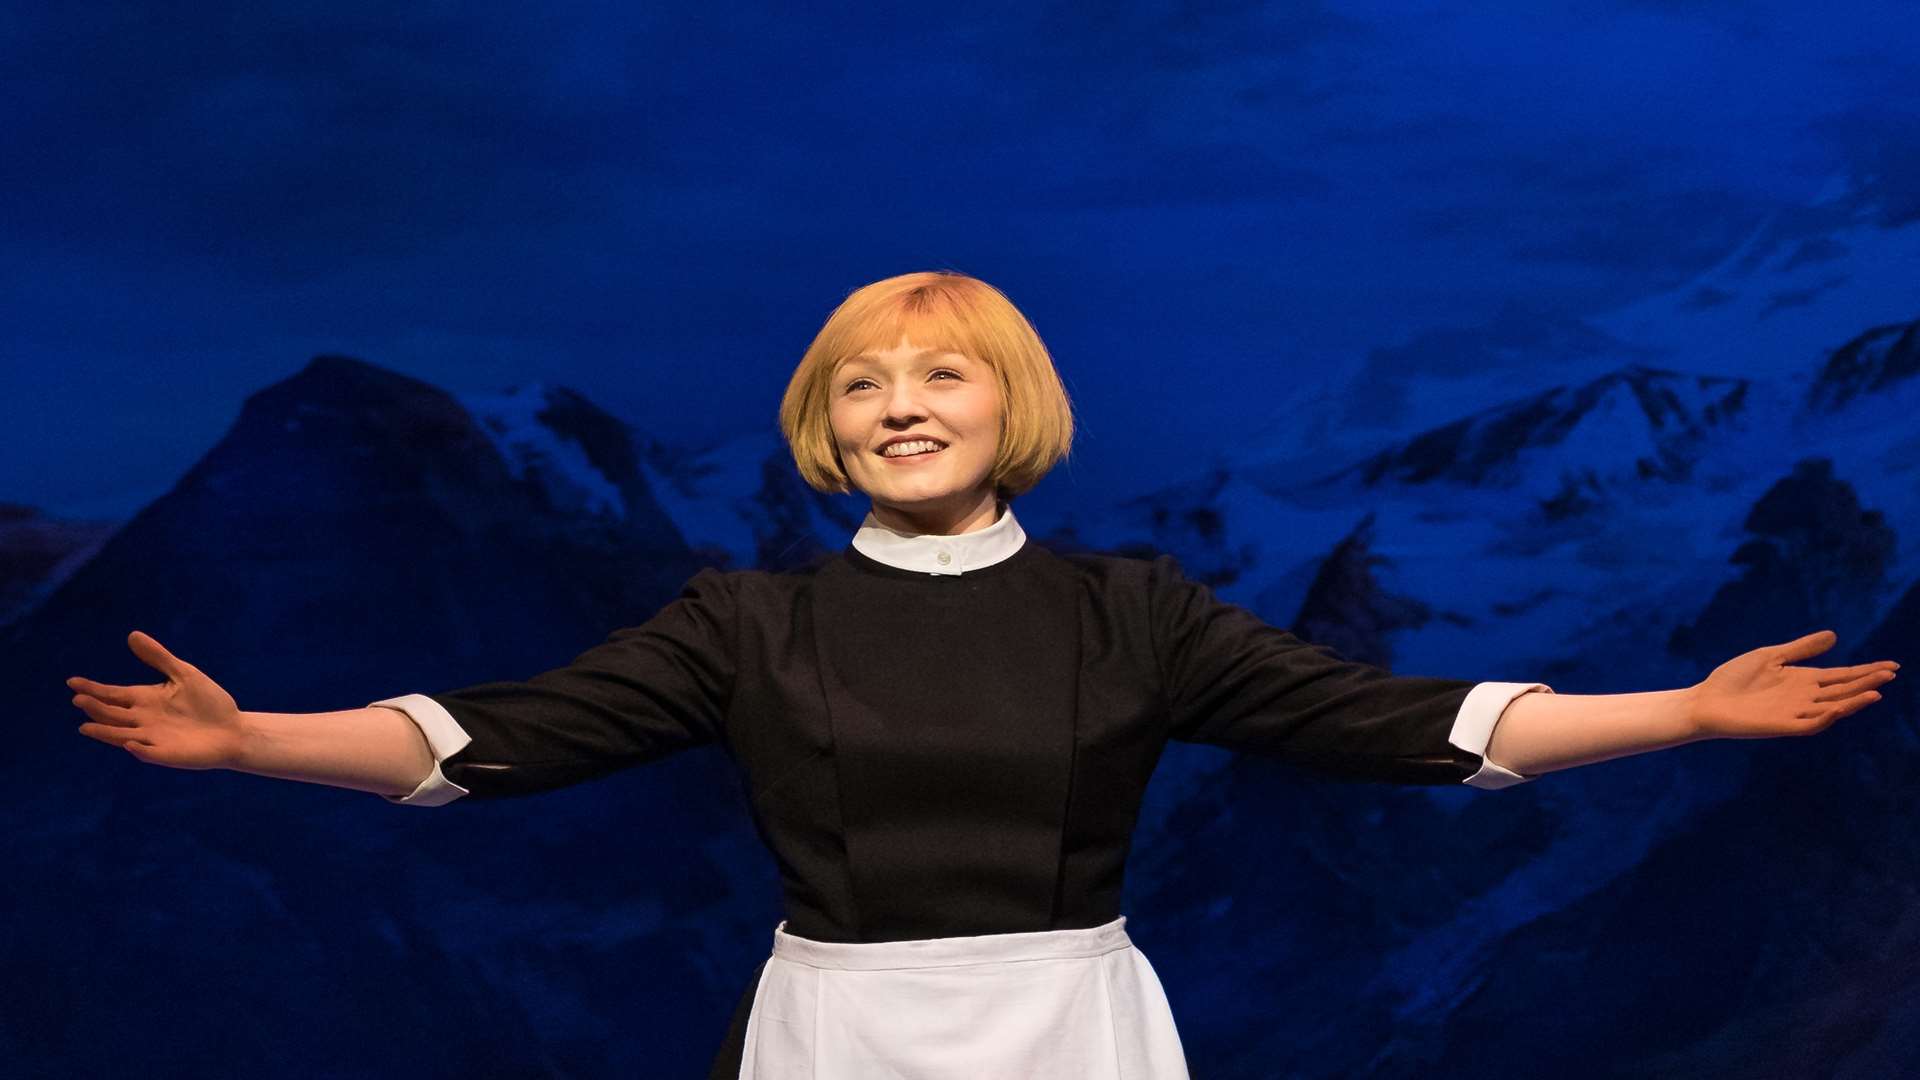 Lucy O'Byrne in the Sound of Music, coming to Bromley and Tunbridge Wells